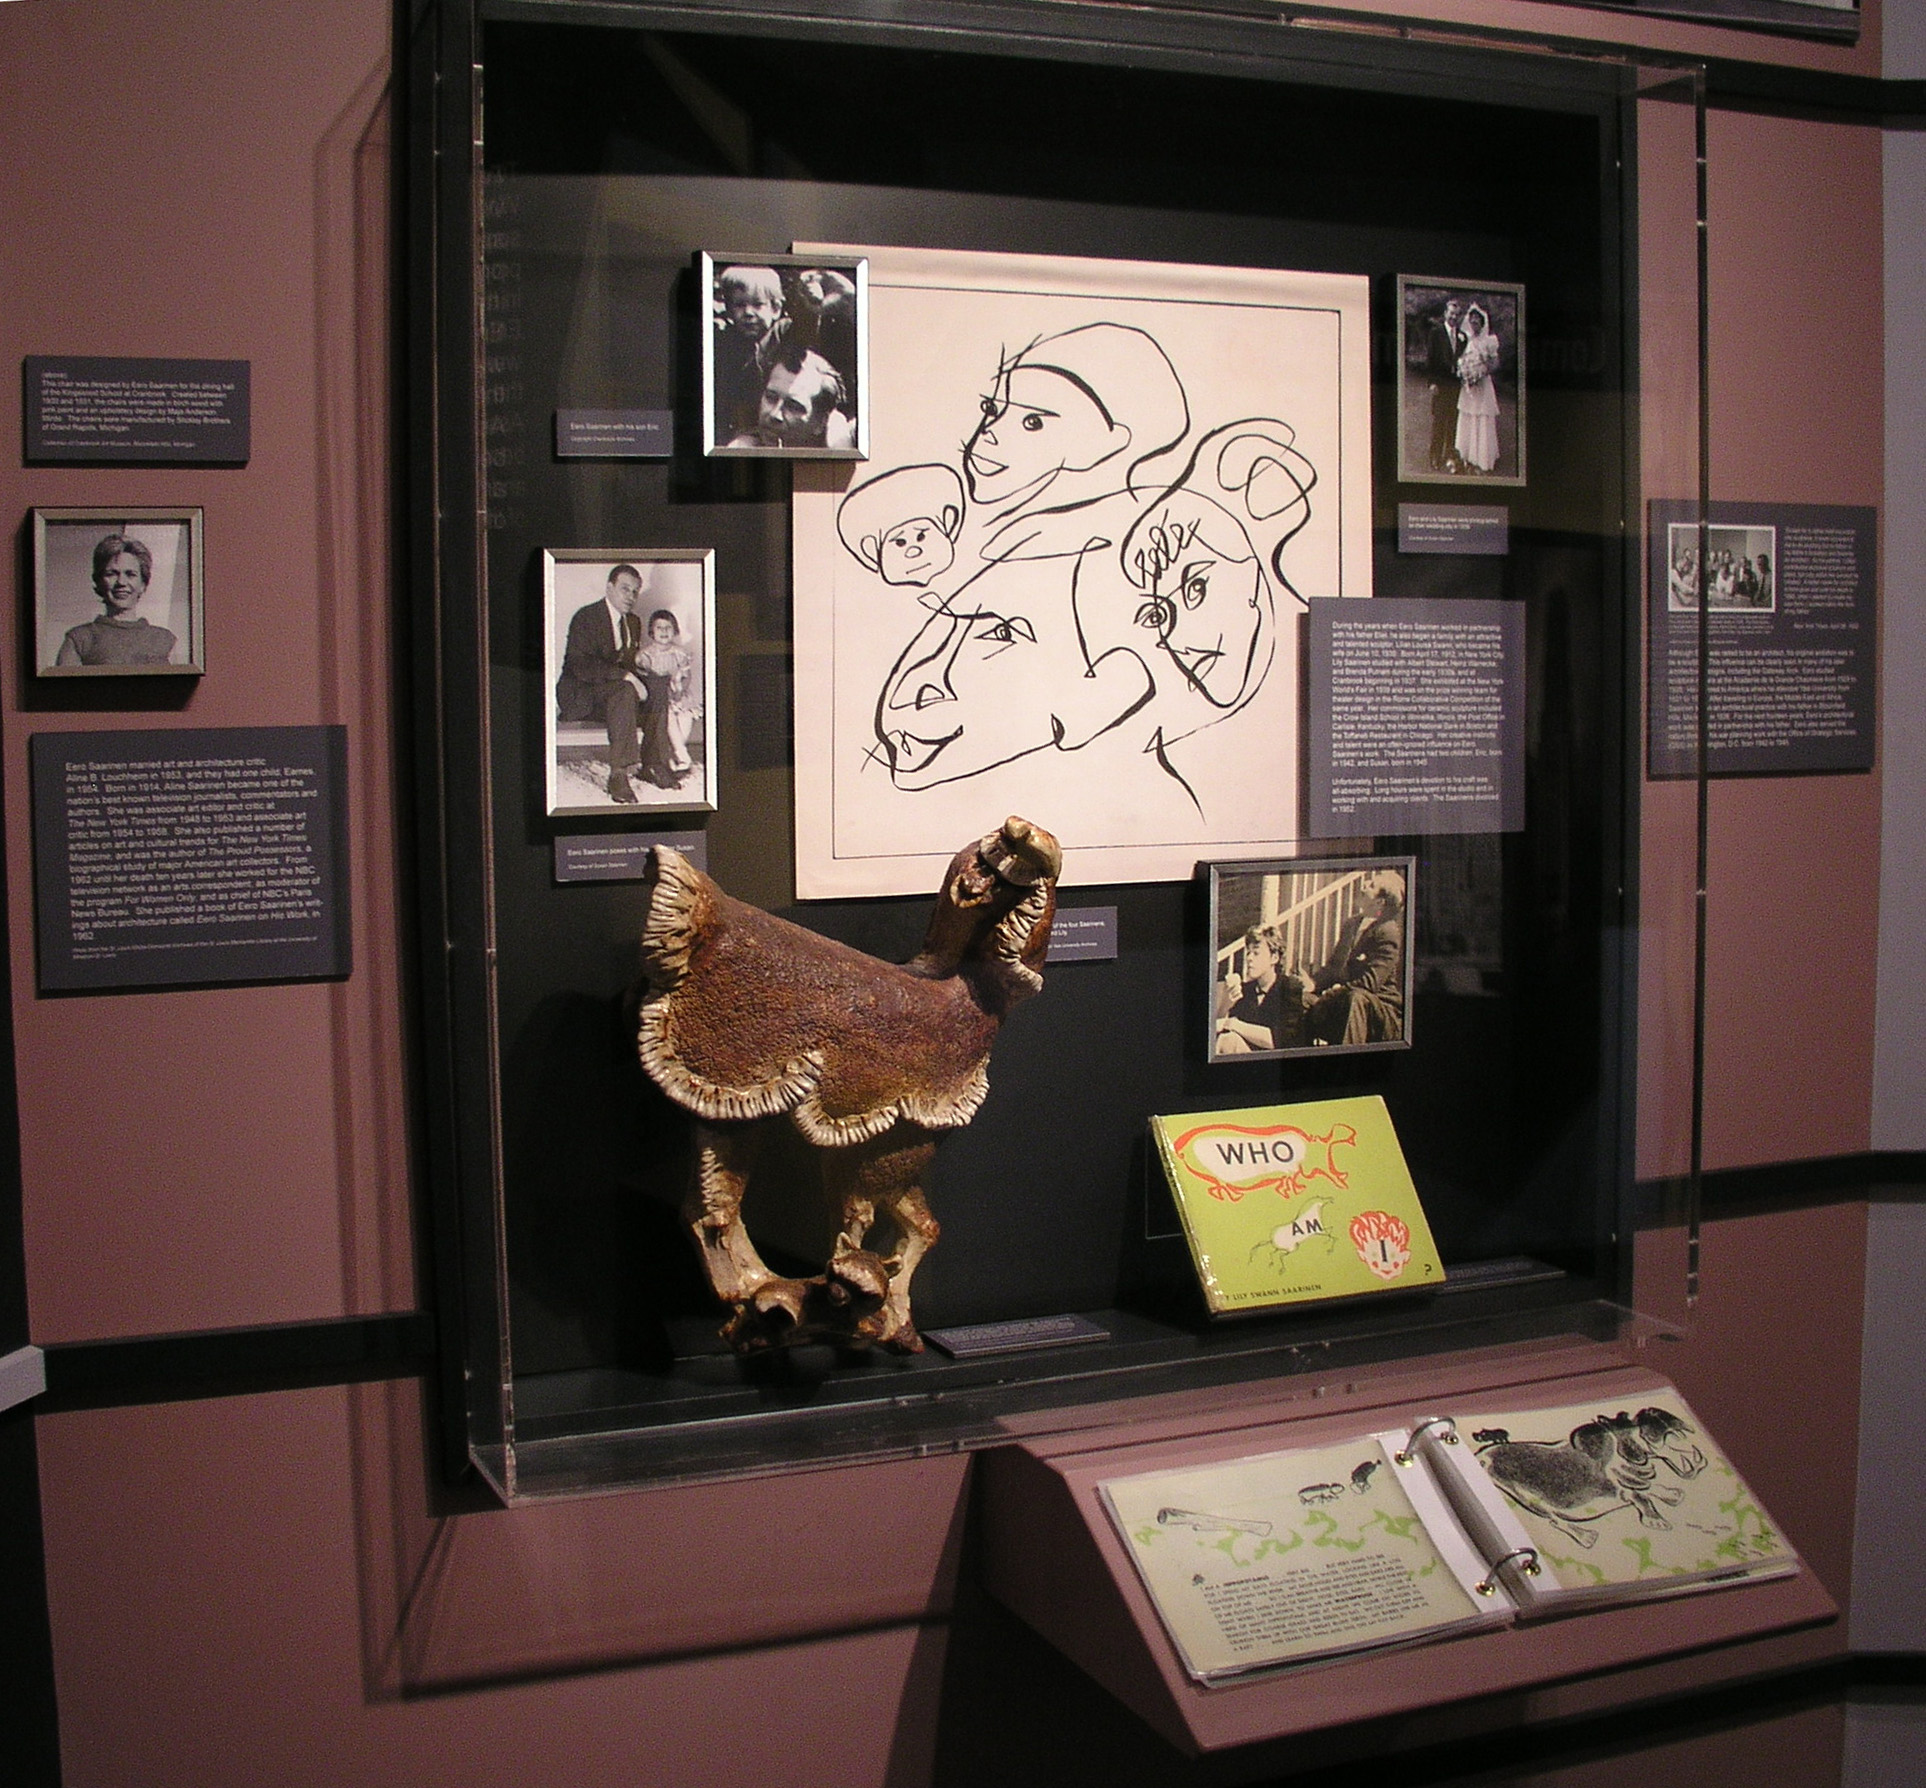 Case from the exhibit